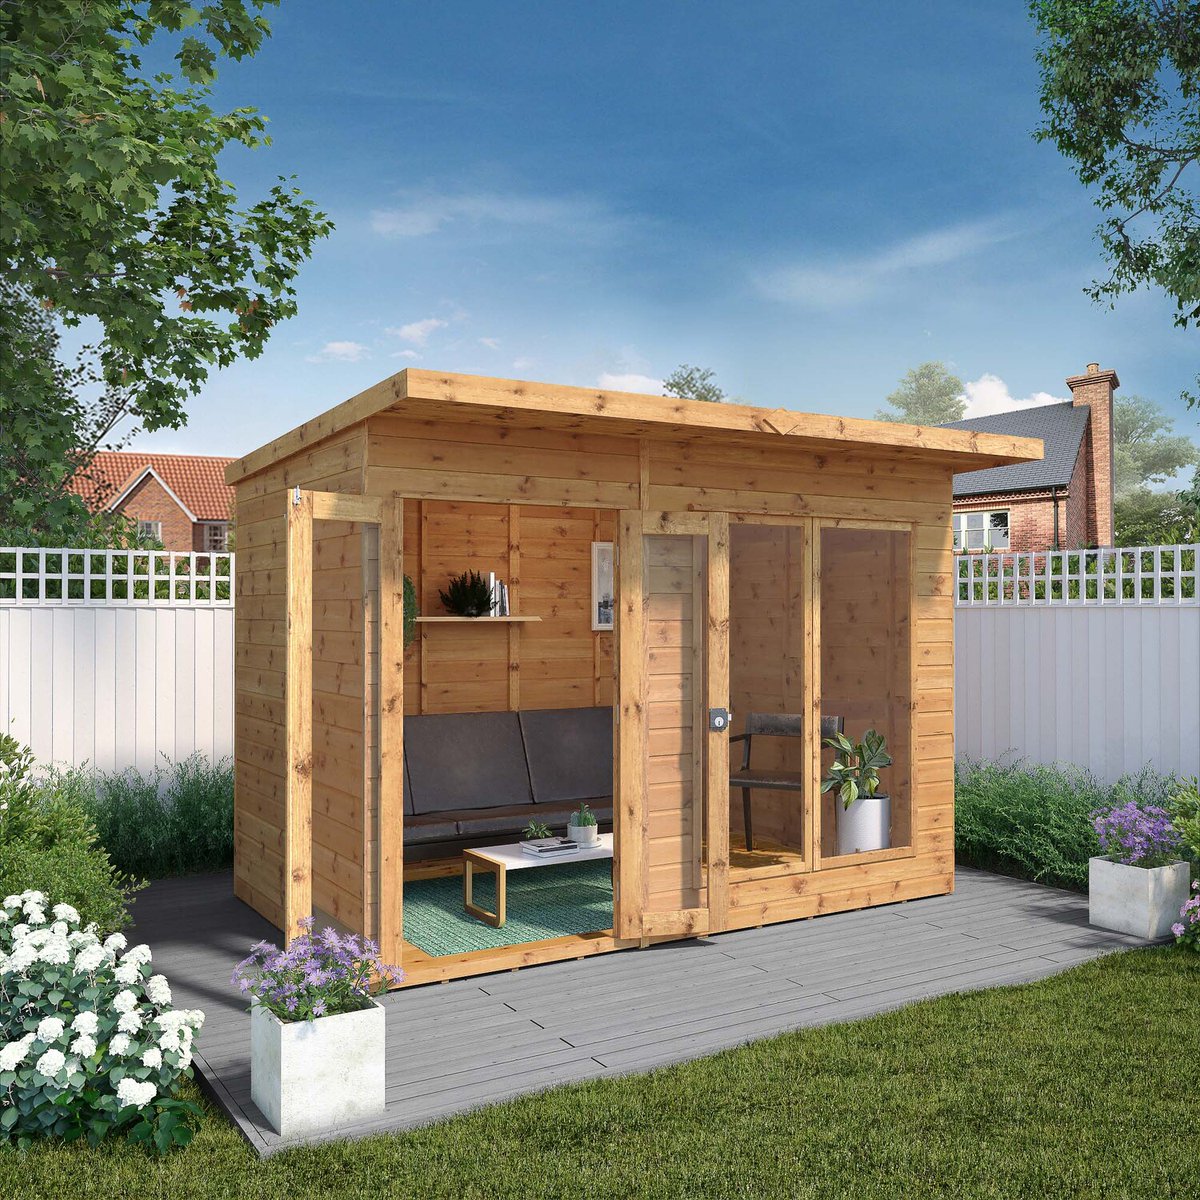 SAVE on Summerhouses 😍👇 

That's right, as part of our 🍃 GARDENING EVENT 🍃 on now you can SAVE £££'s on Summerhouses... SHOP HERE >> bit.ly/4bF4TGP